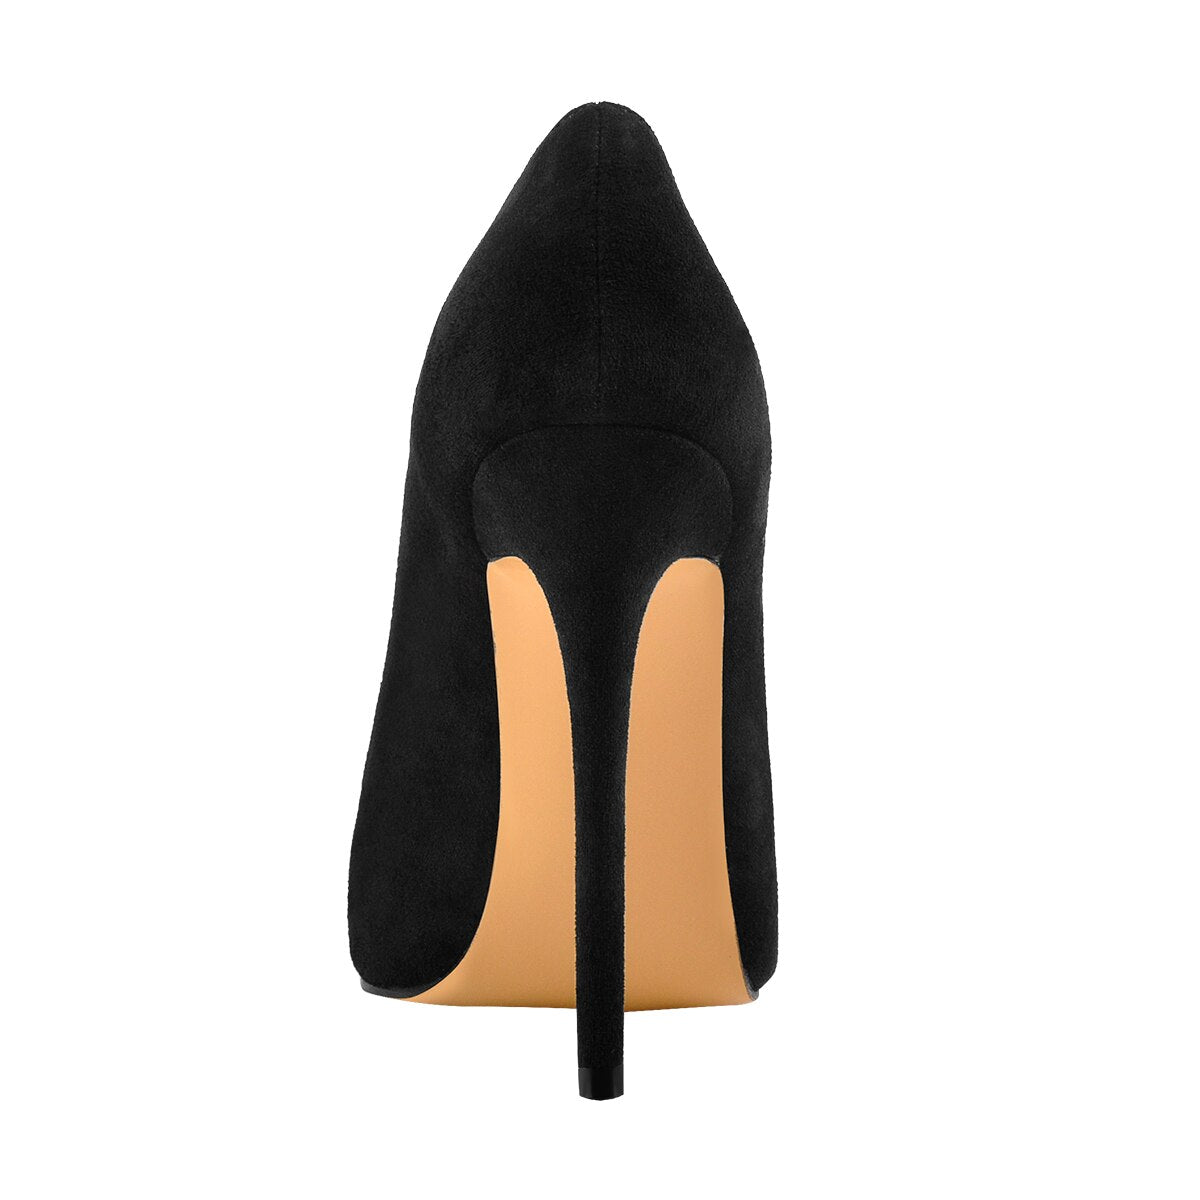 Pointed Toe Snake Slip On Pumps High Heel Shoes